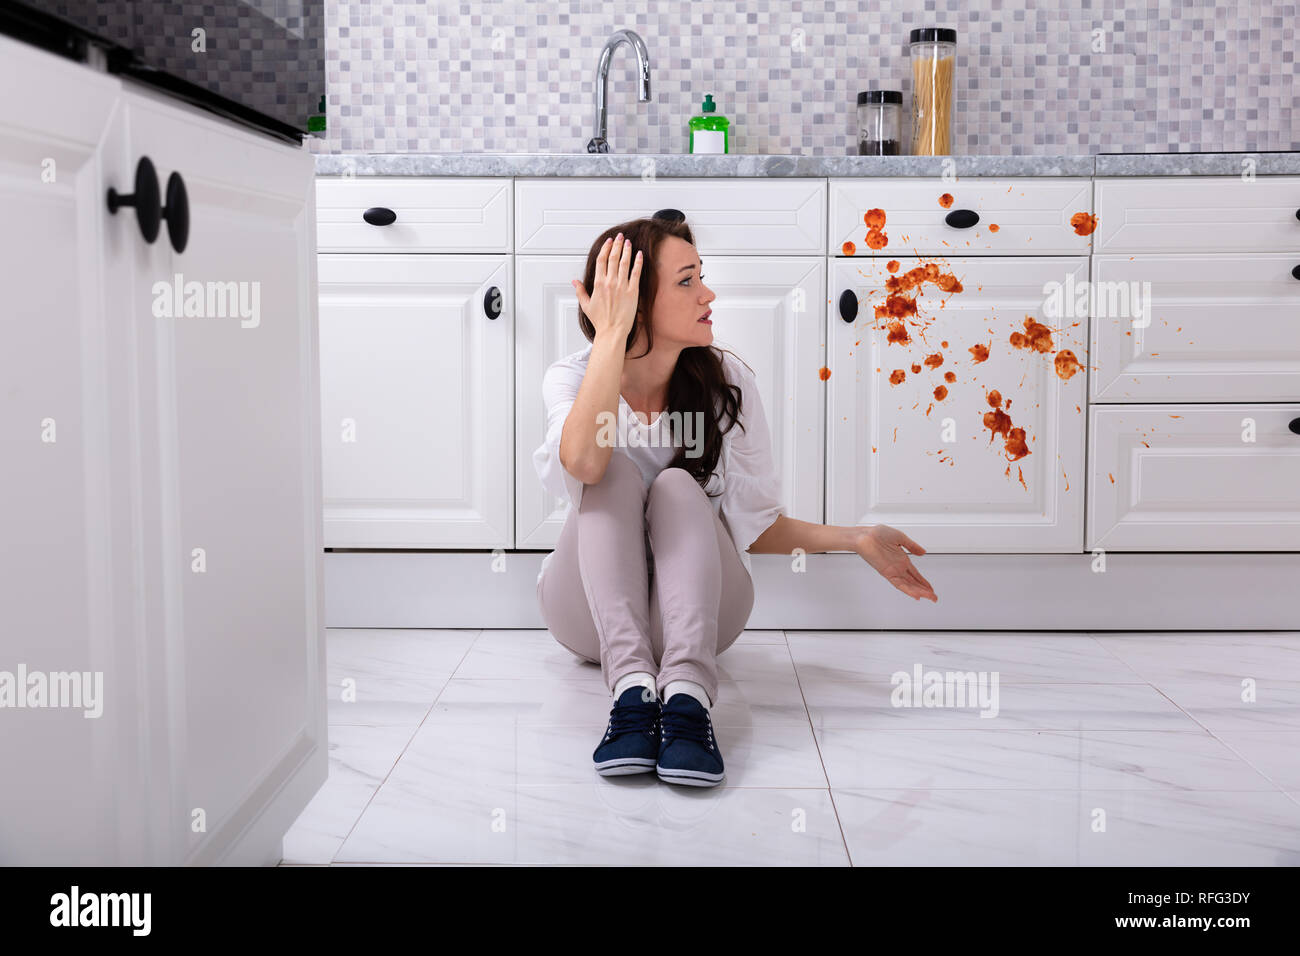 Sad Woman Sitting On Floor With Spilled Food In Kitchen Stock Photo